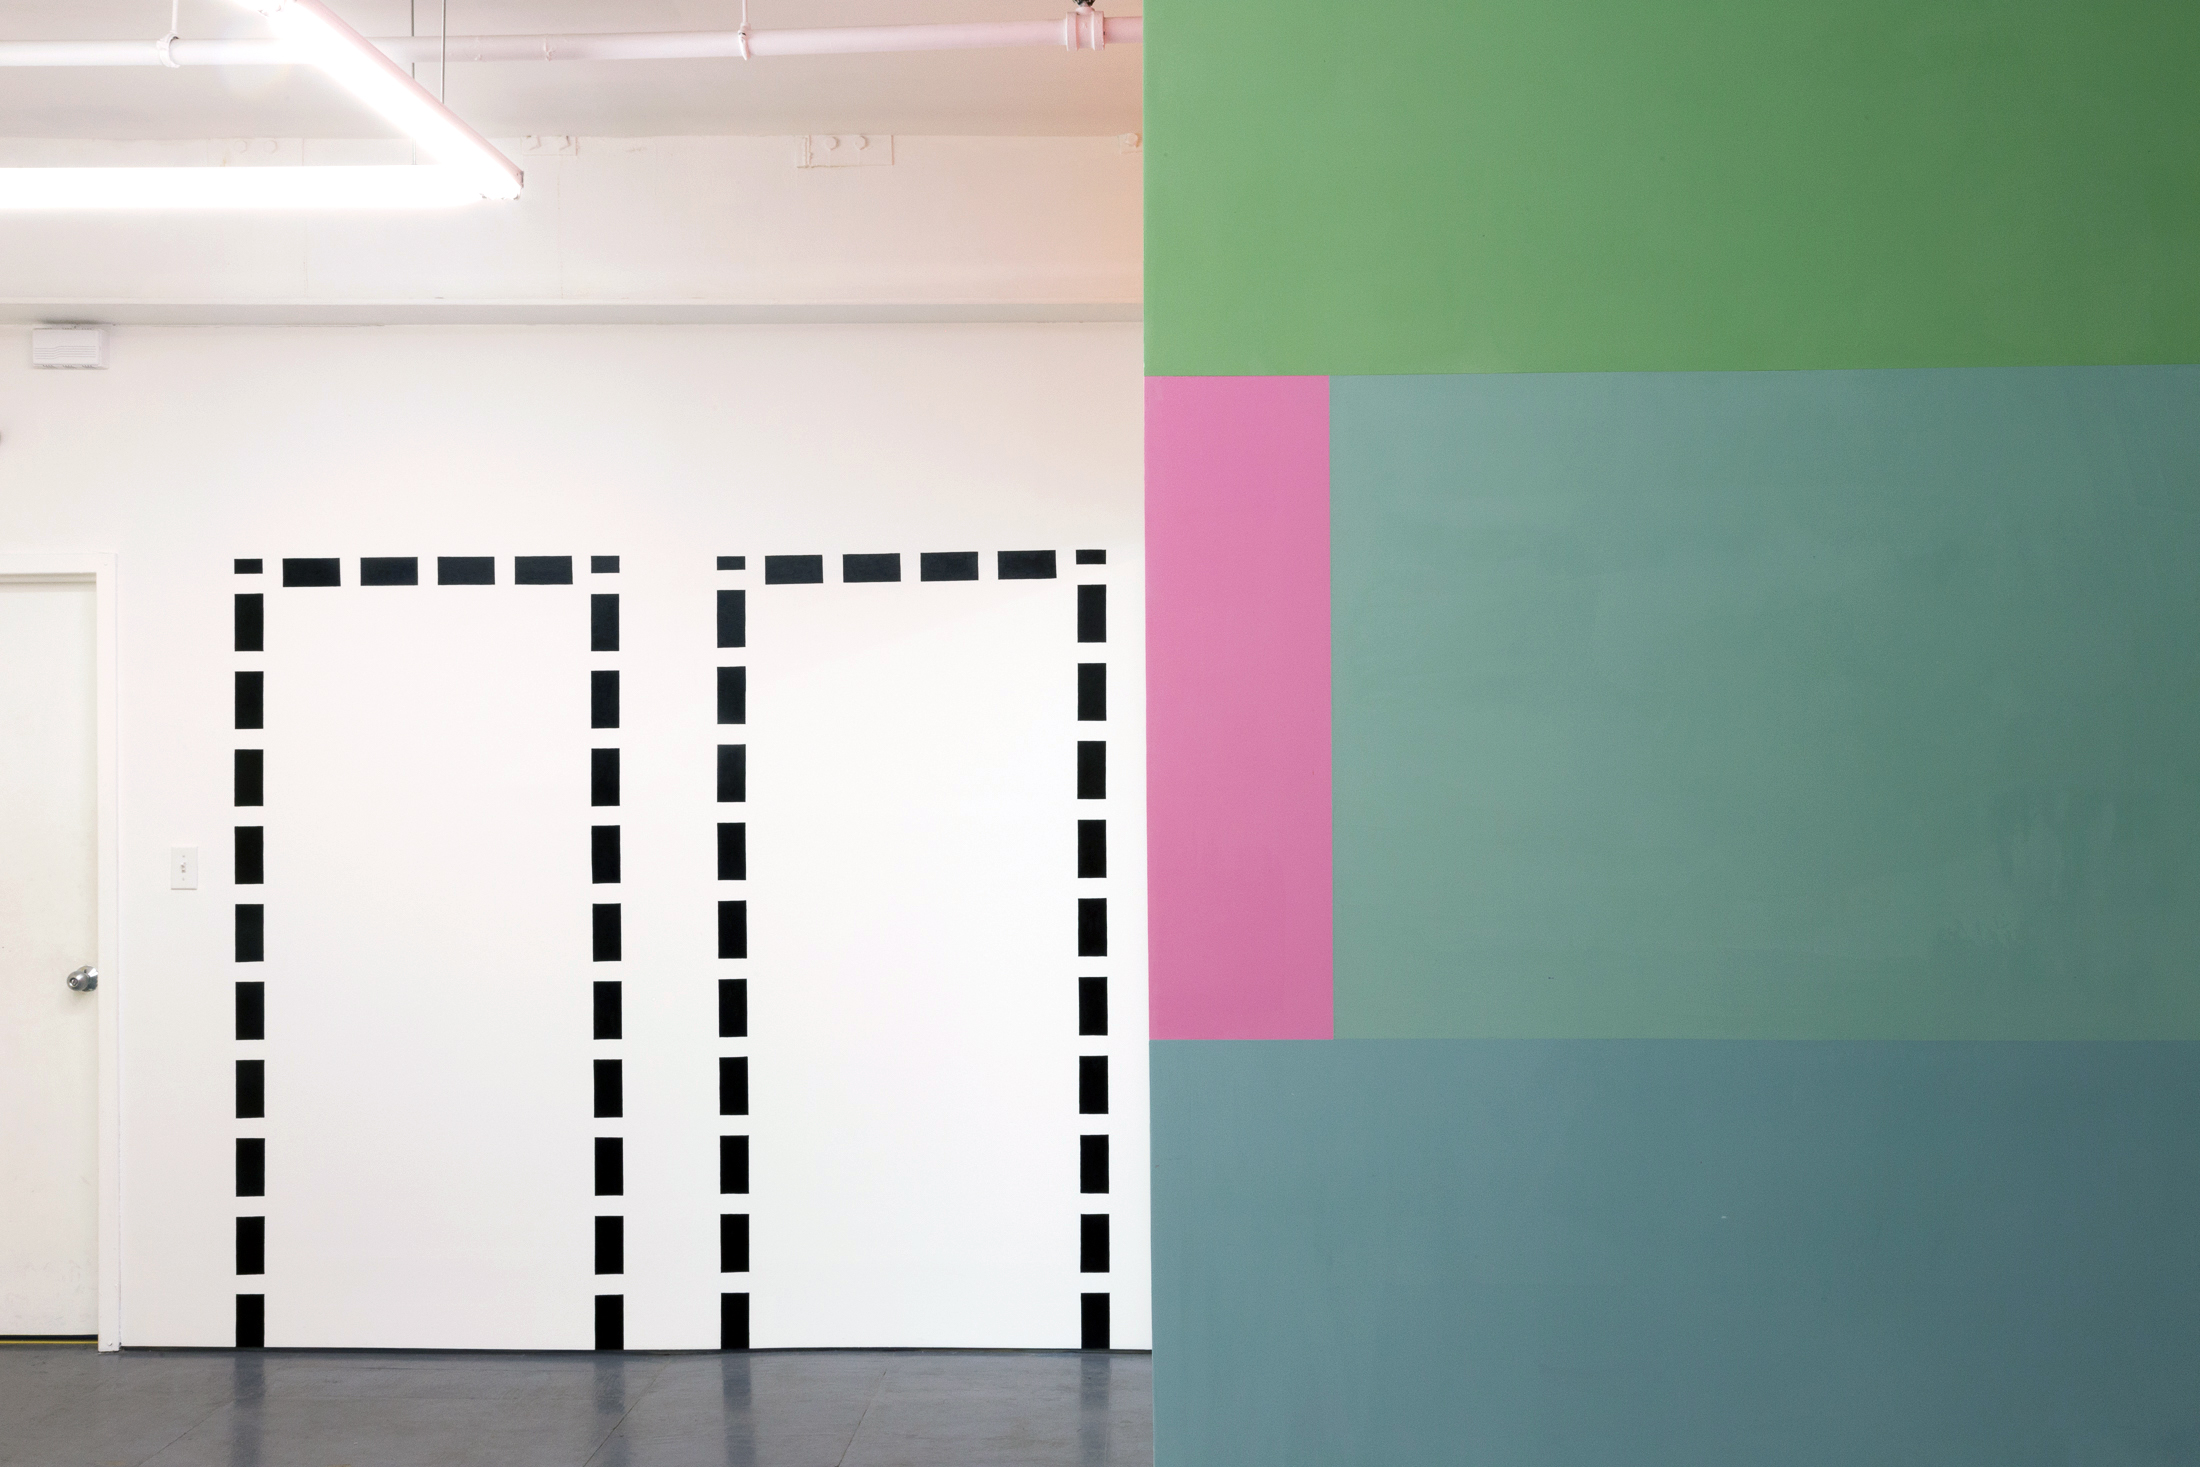  Installation view of Abstract Wall Painting III at Transmitter 